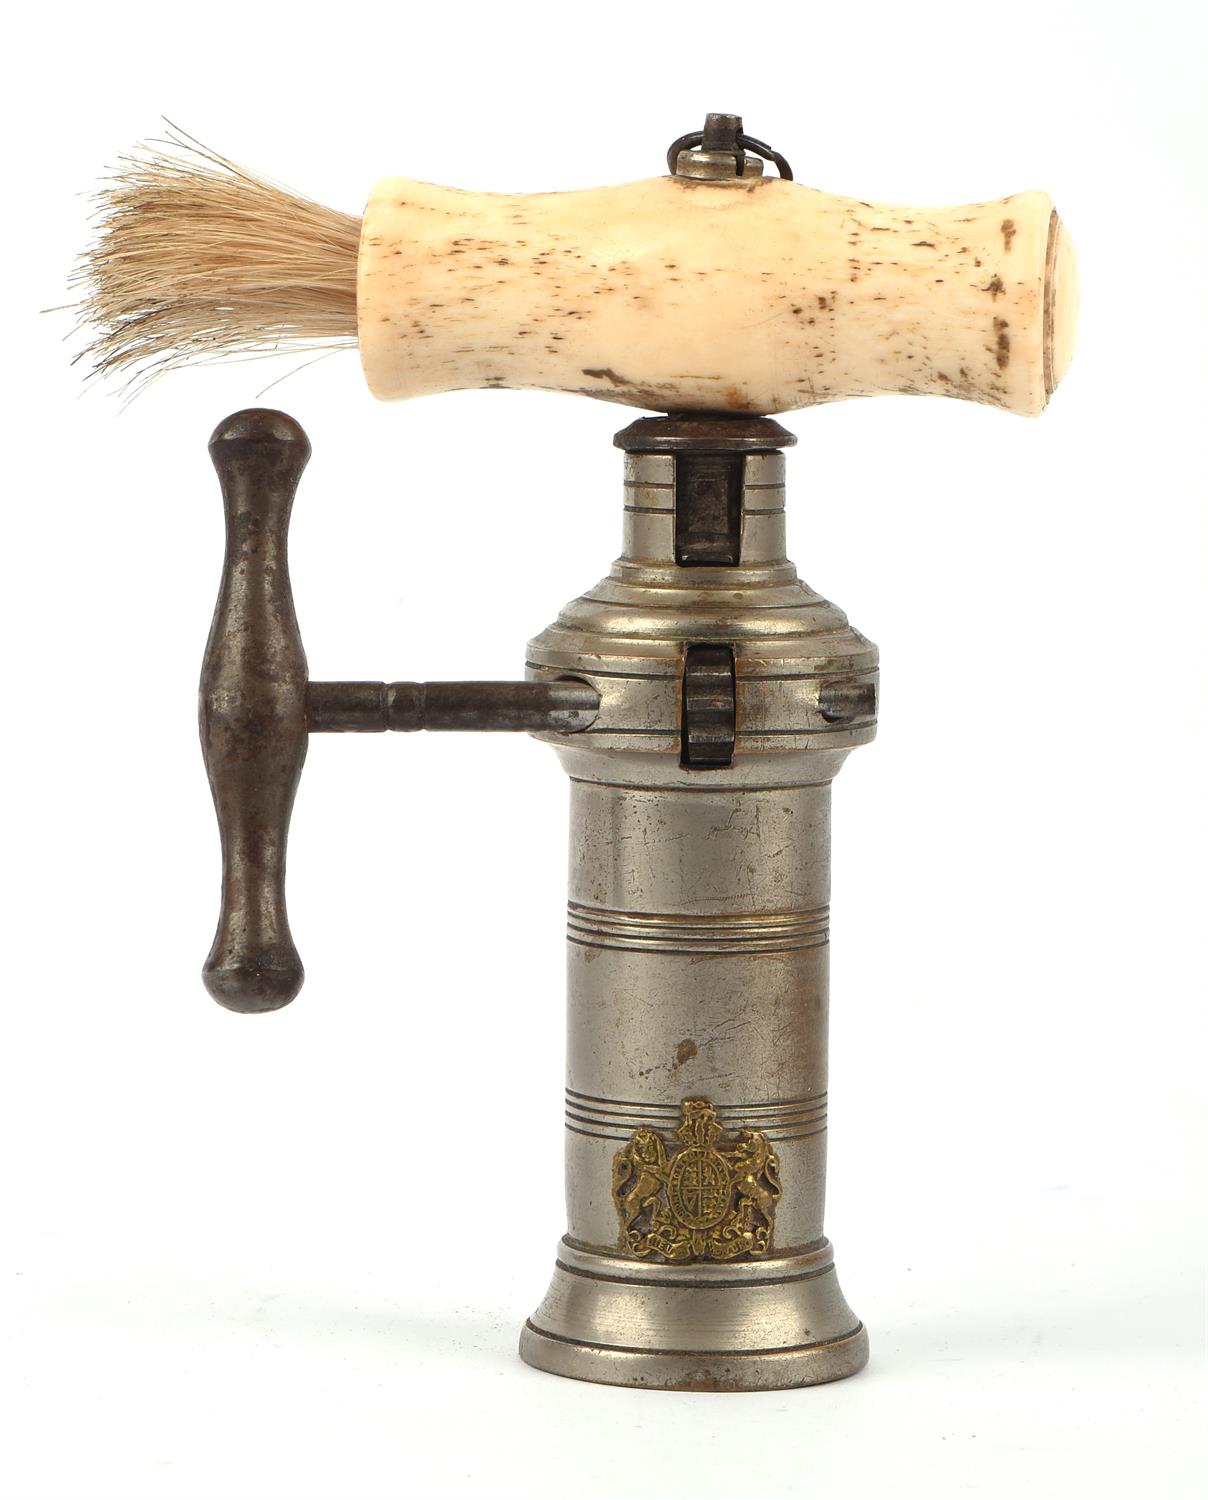 Patent corkscrew, 19th Century, with a bone handle, 26cm extended